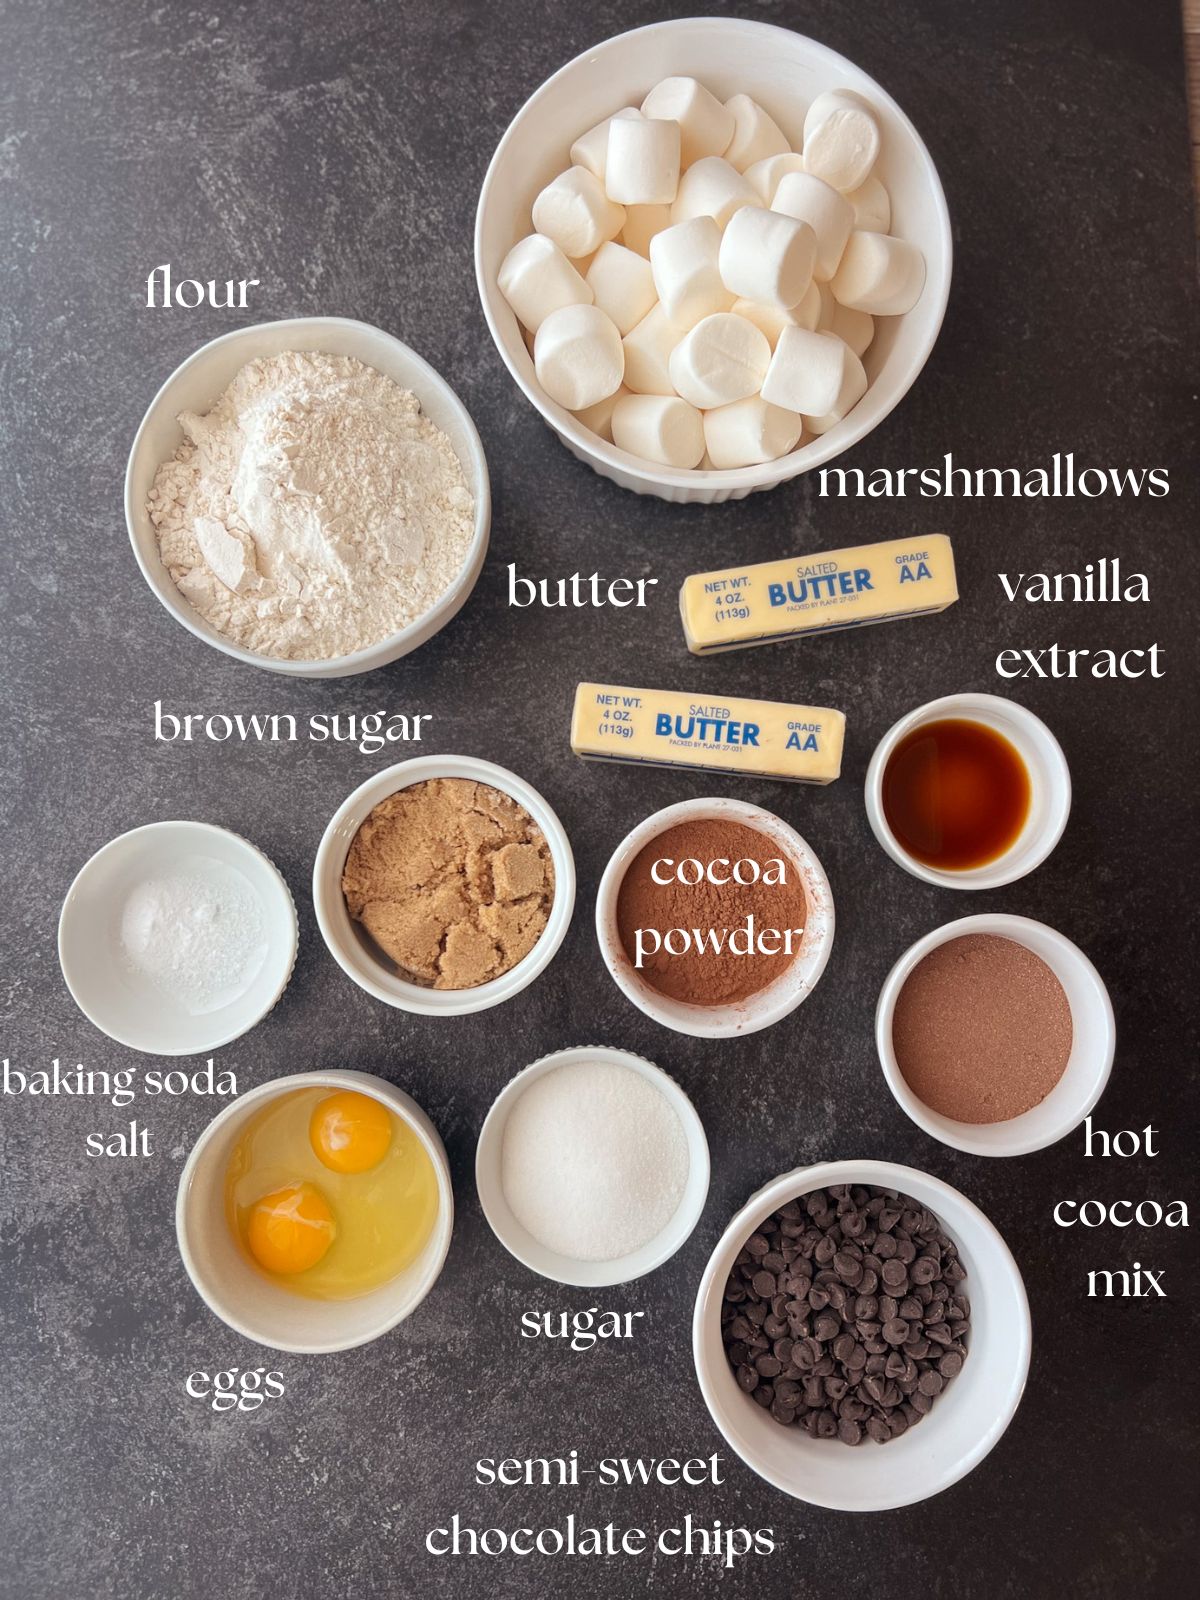 Ingredient shot for the hot cocoa cookies: marshmallows, flour, butter, vanilla extract, brown sugar, granulated sugar, hot cocoa mix, cocoa powder, baking soda, salt, semi-sweet chocolate chips, eggs.